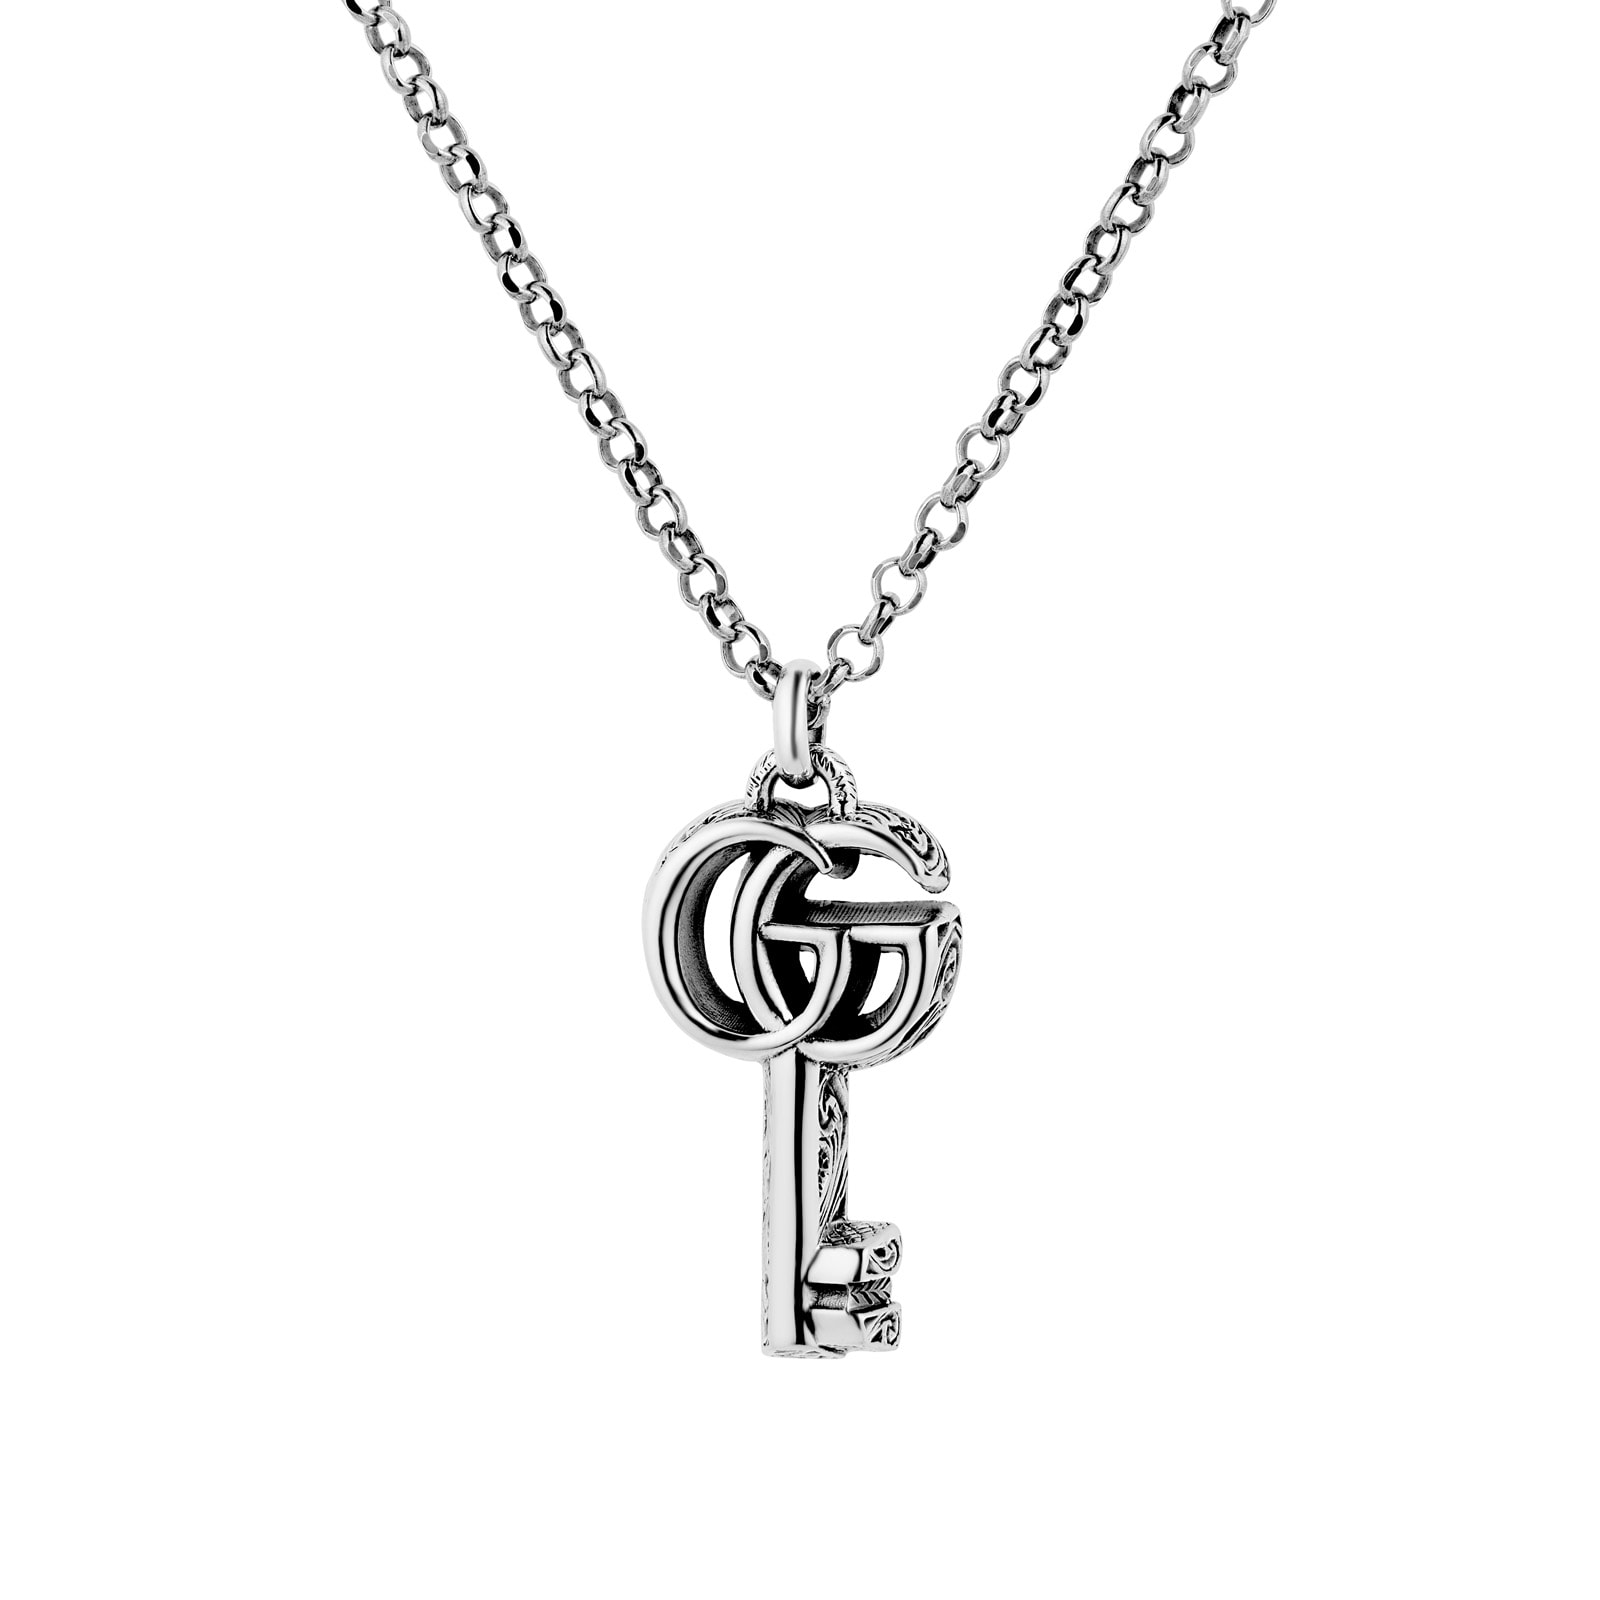 Silver GG Marmont Key Necklace